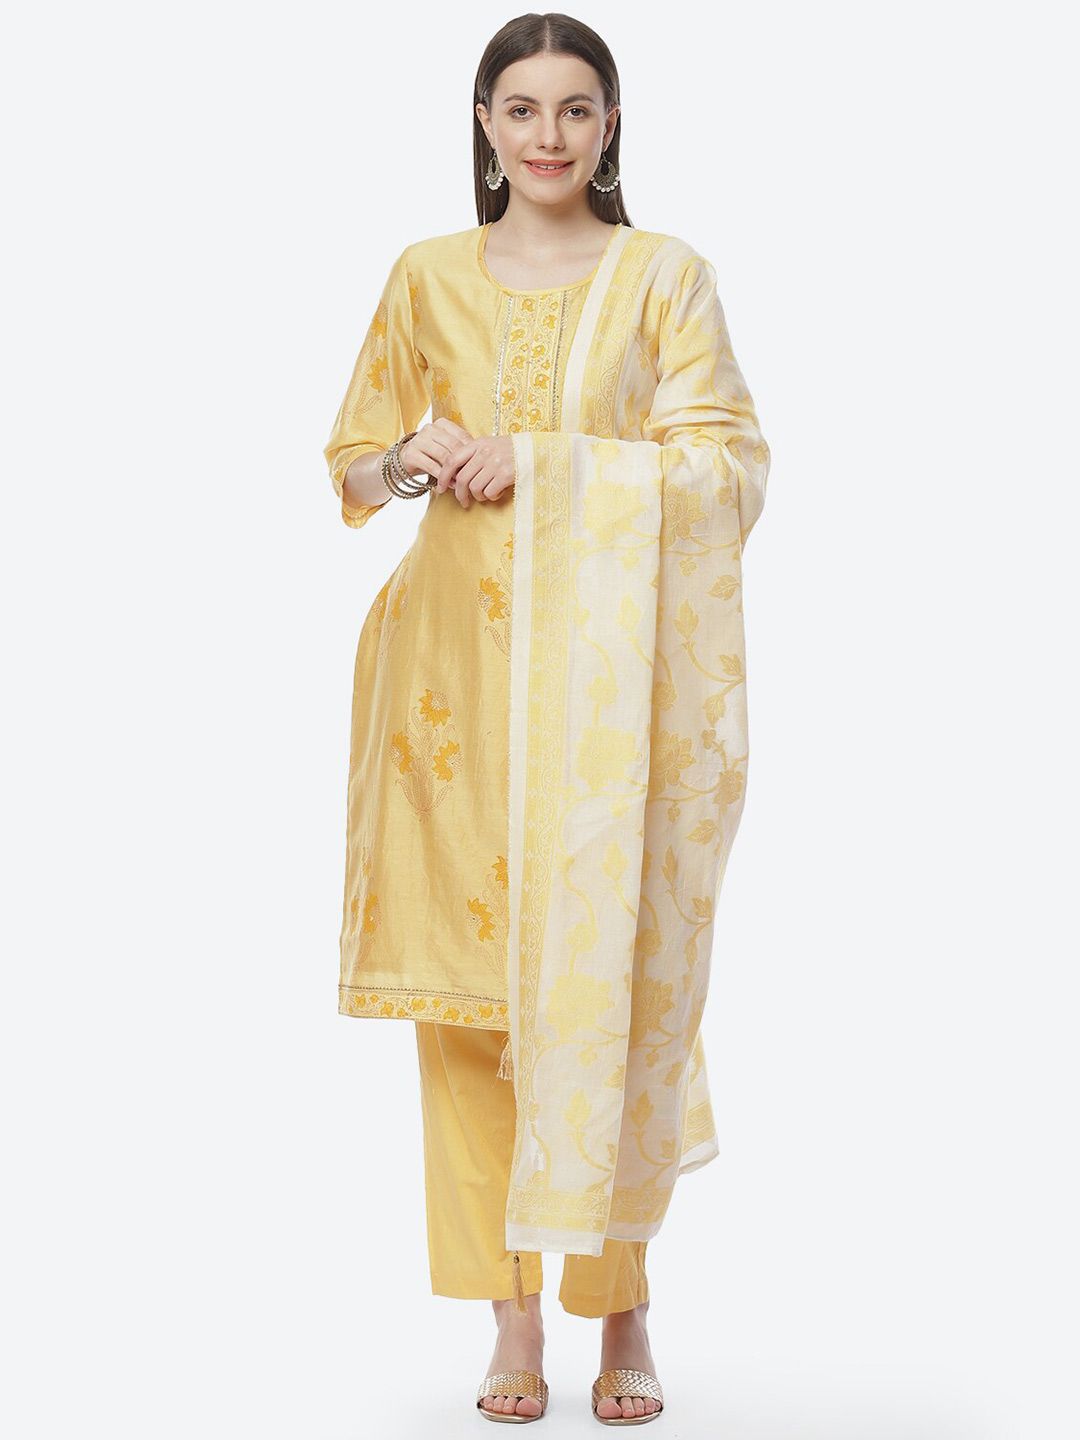 Biba Women Yellow & White Hand Block Printed Unstitched Dress Material Price in India